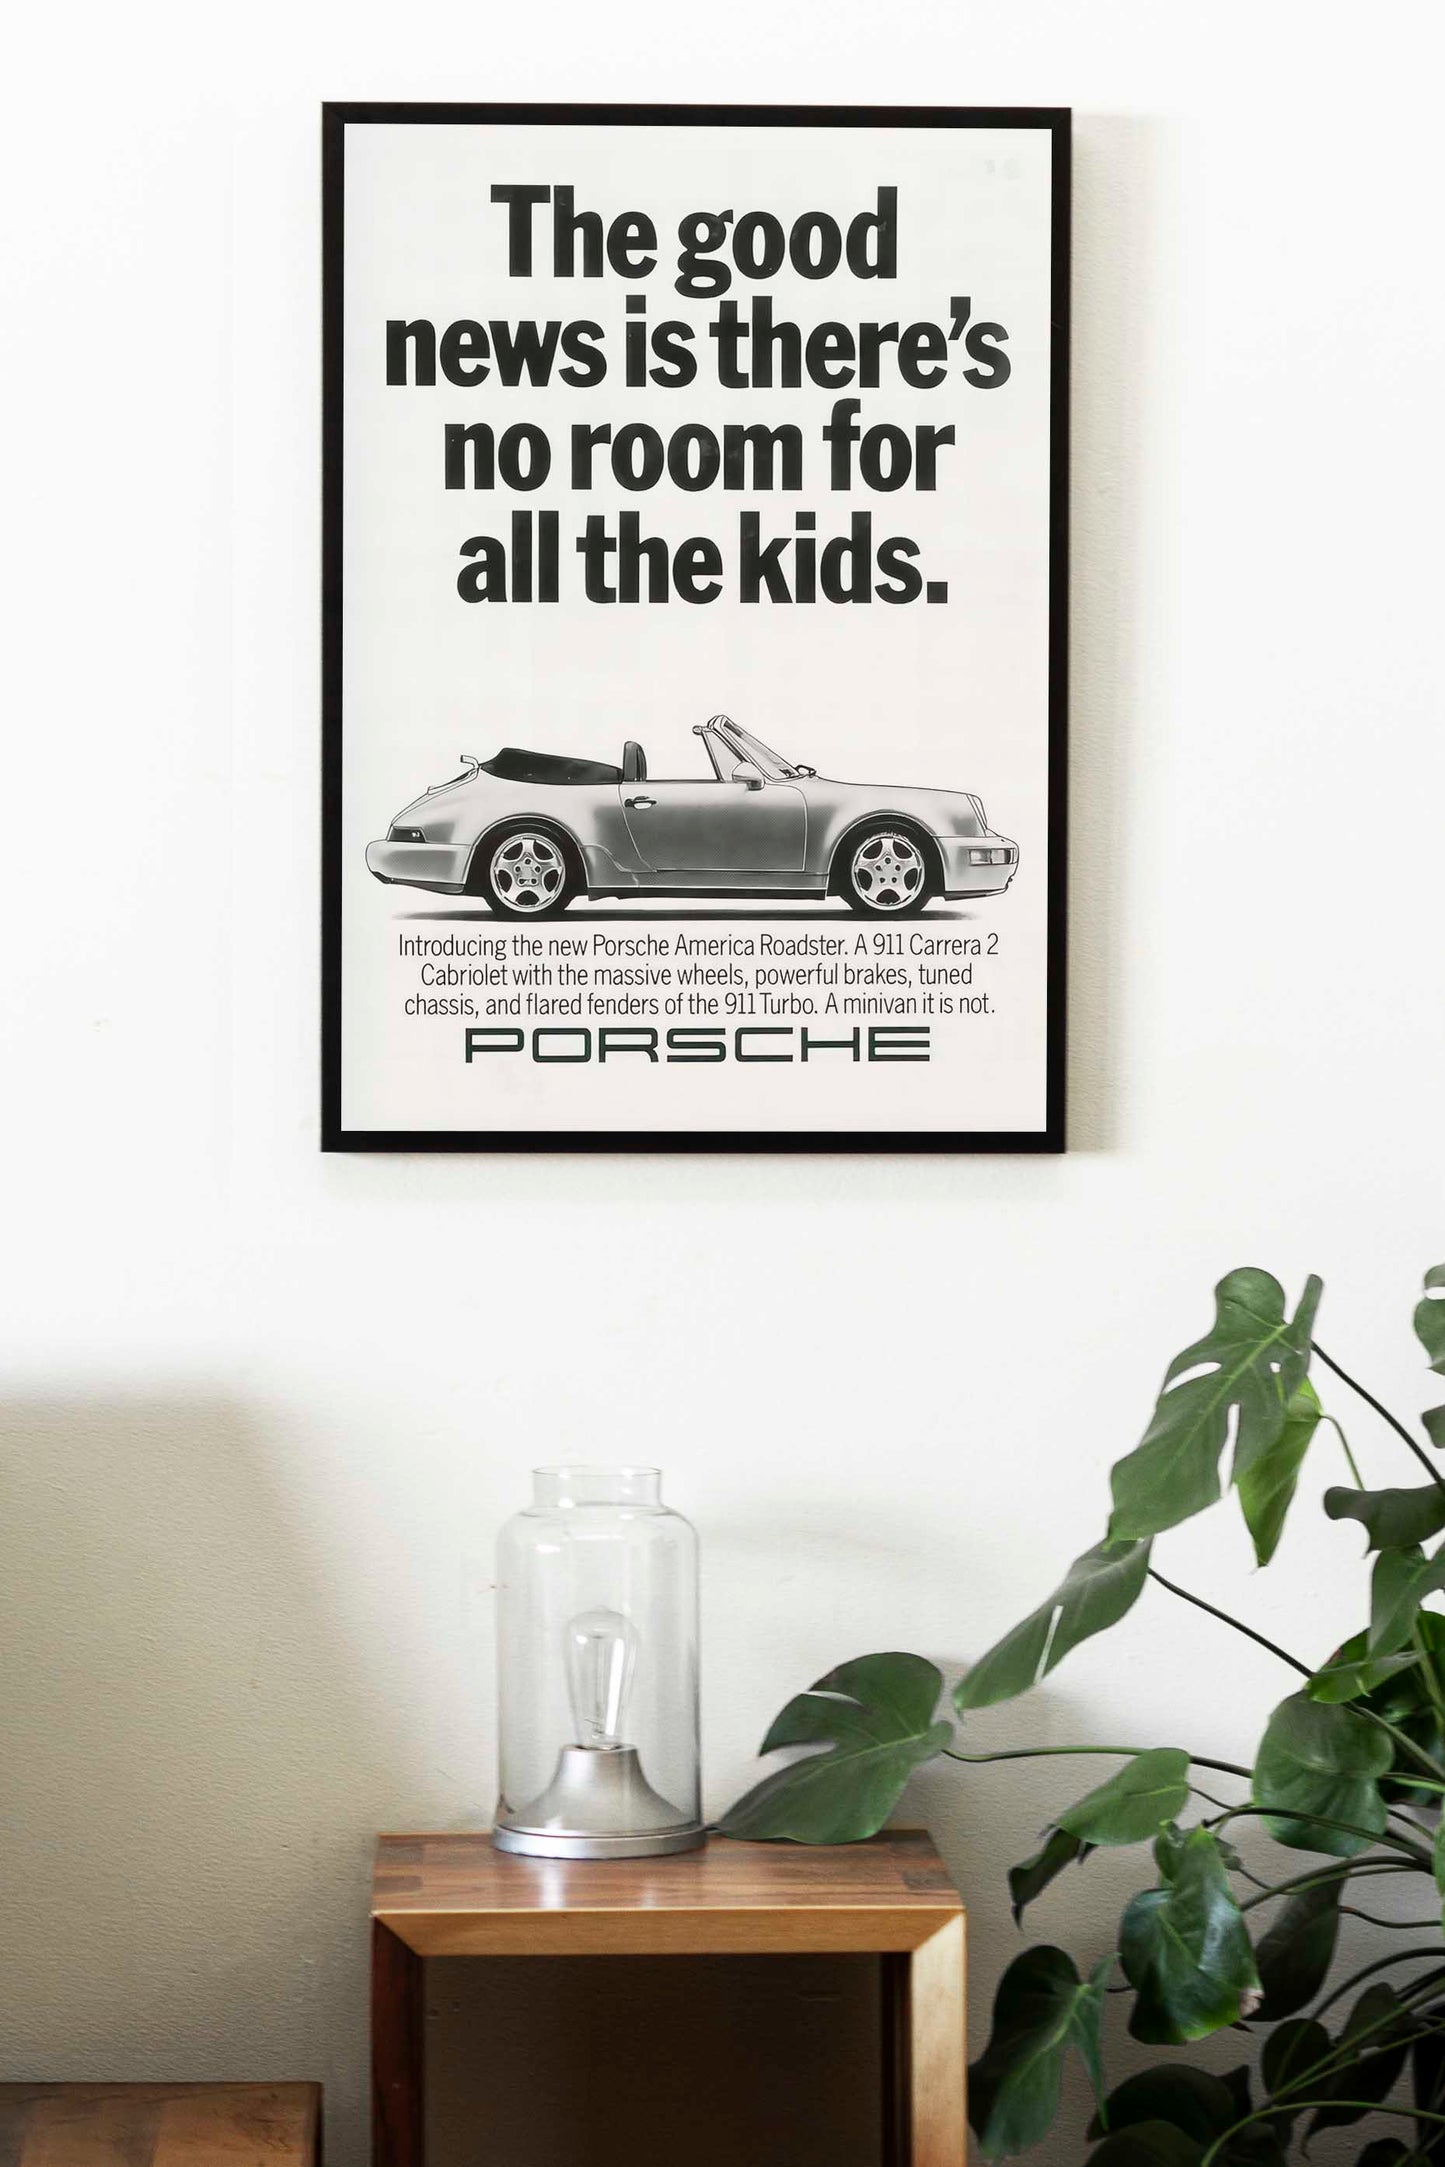 Porsche 911 "The Good News Is There's No Room For All The Kids" Poster